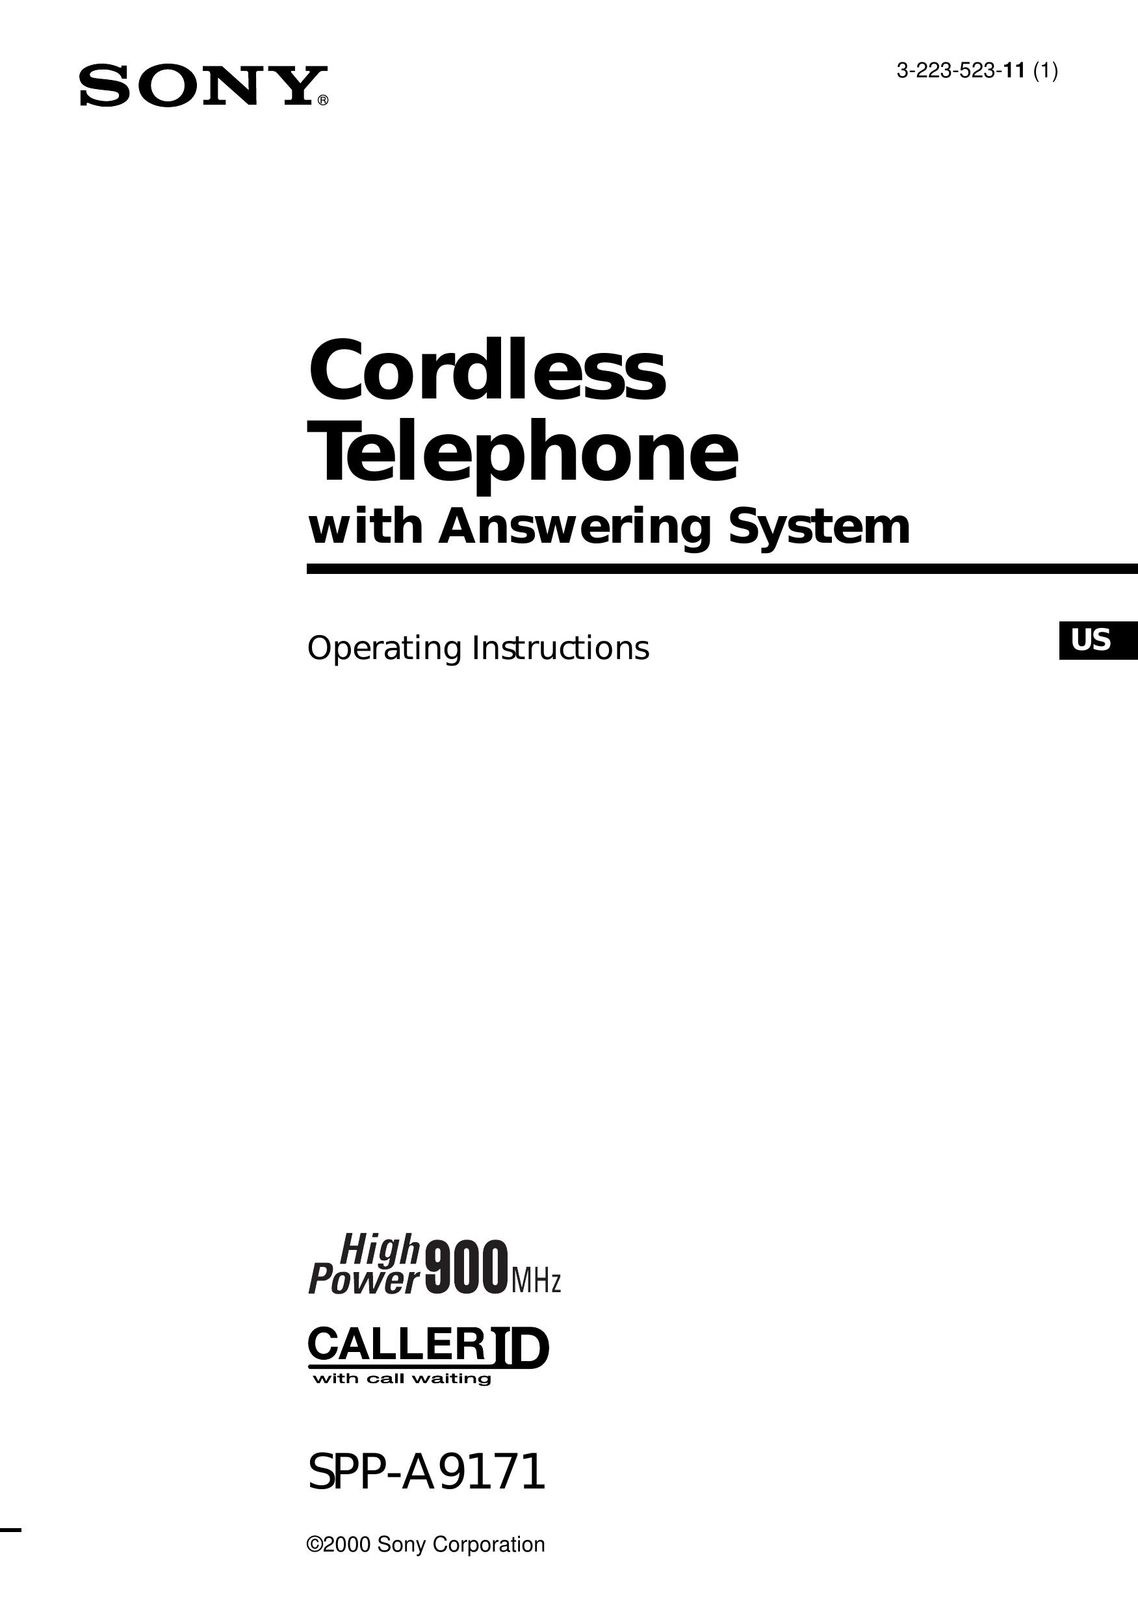 Sony SPP-A9171 Cordless Telephone User Manual